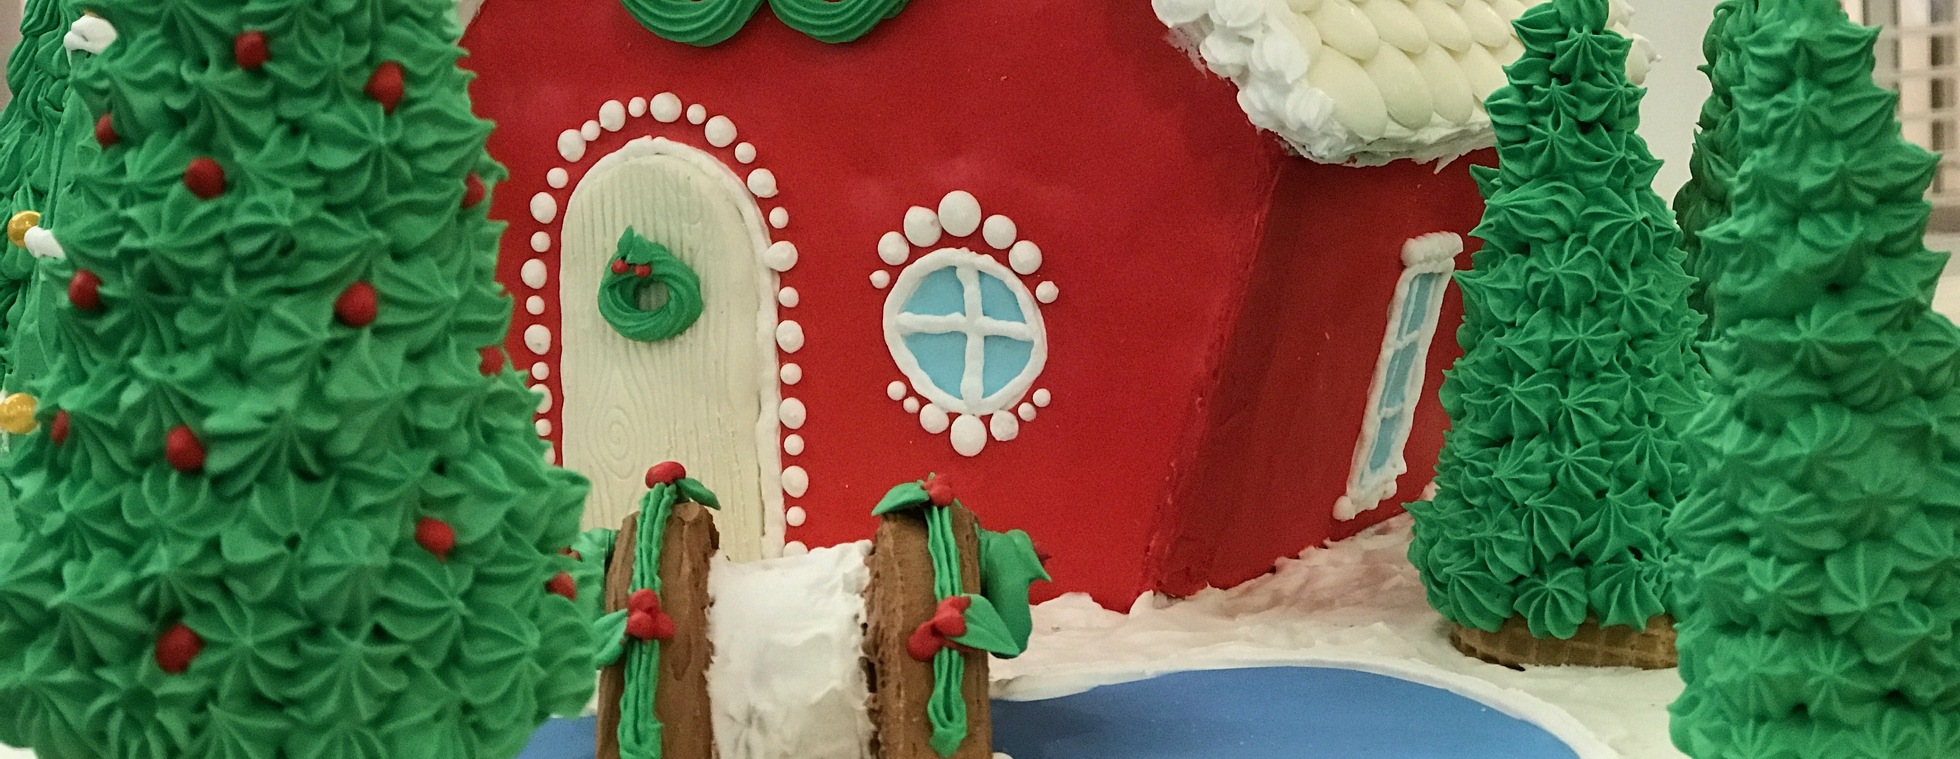 2019 Gingerbread House Competition & Display